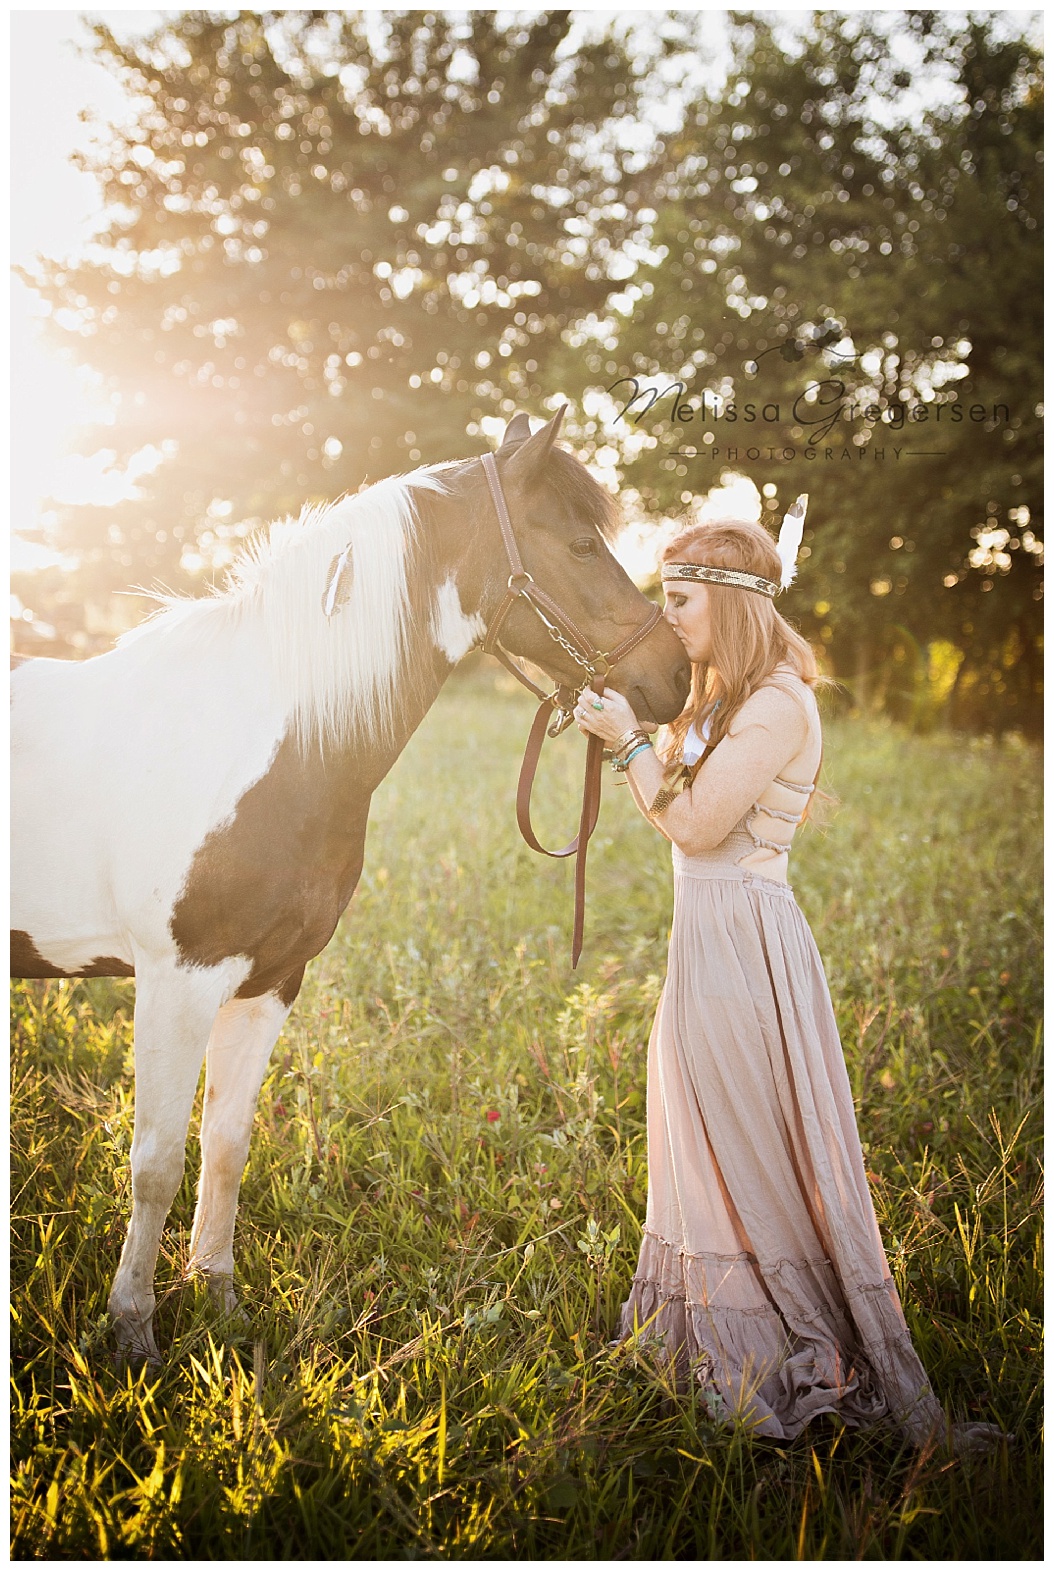 The sun glare really sets off this image of a horse and it's faithful human companion.